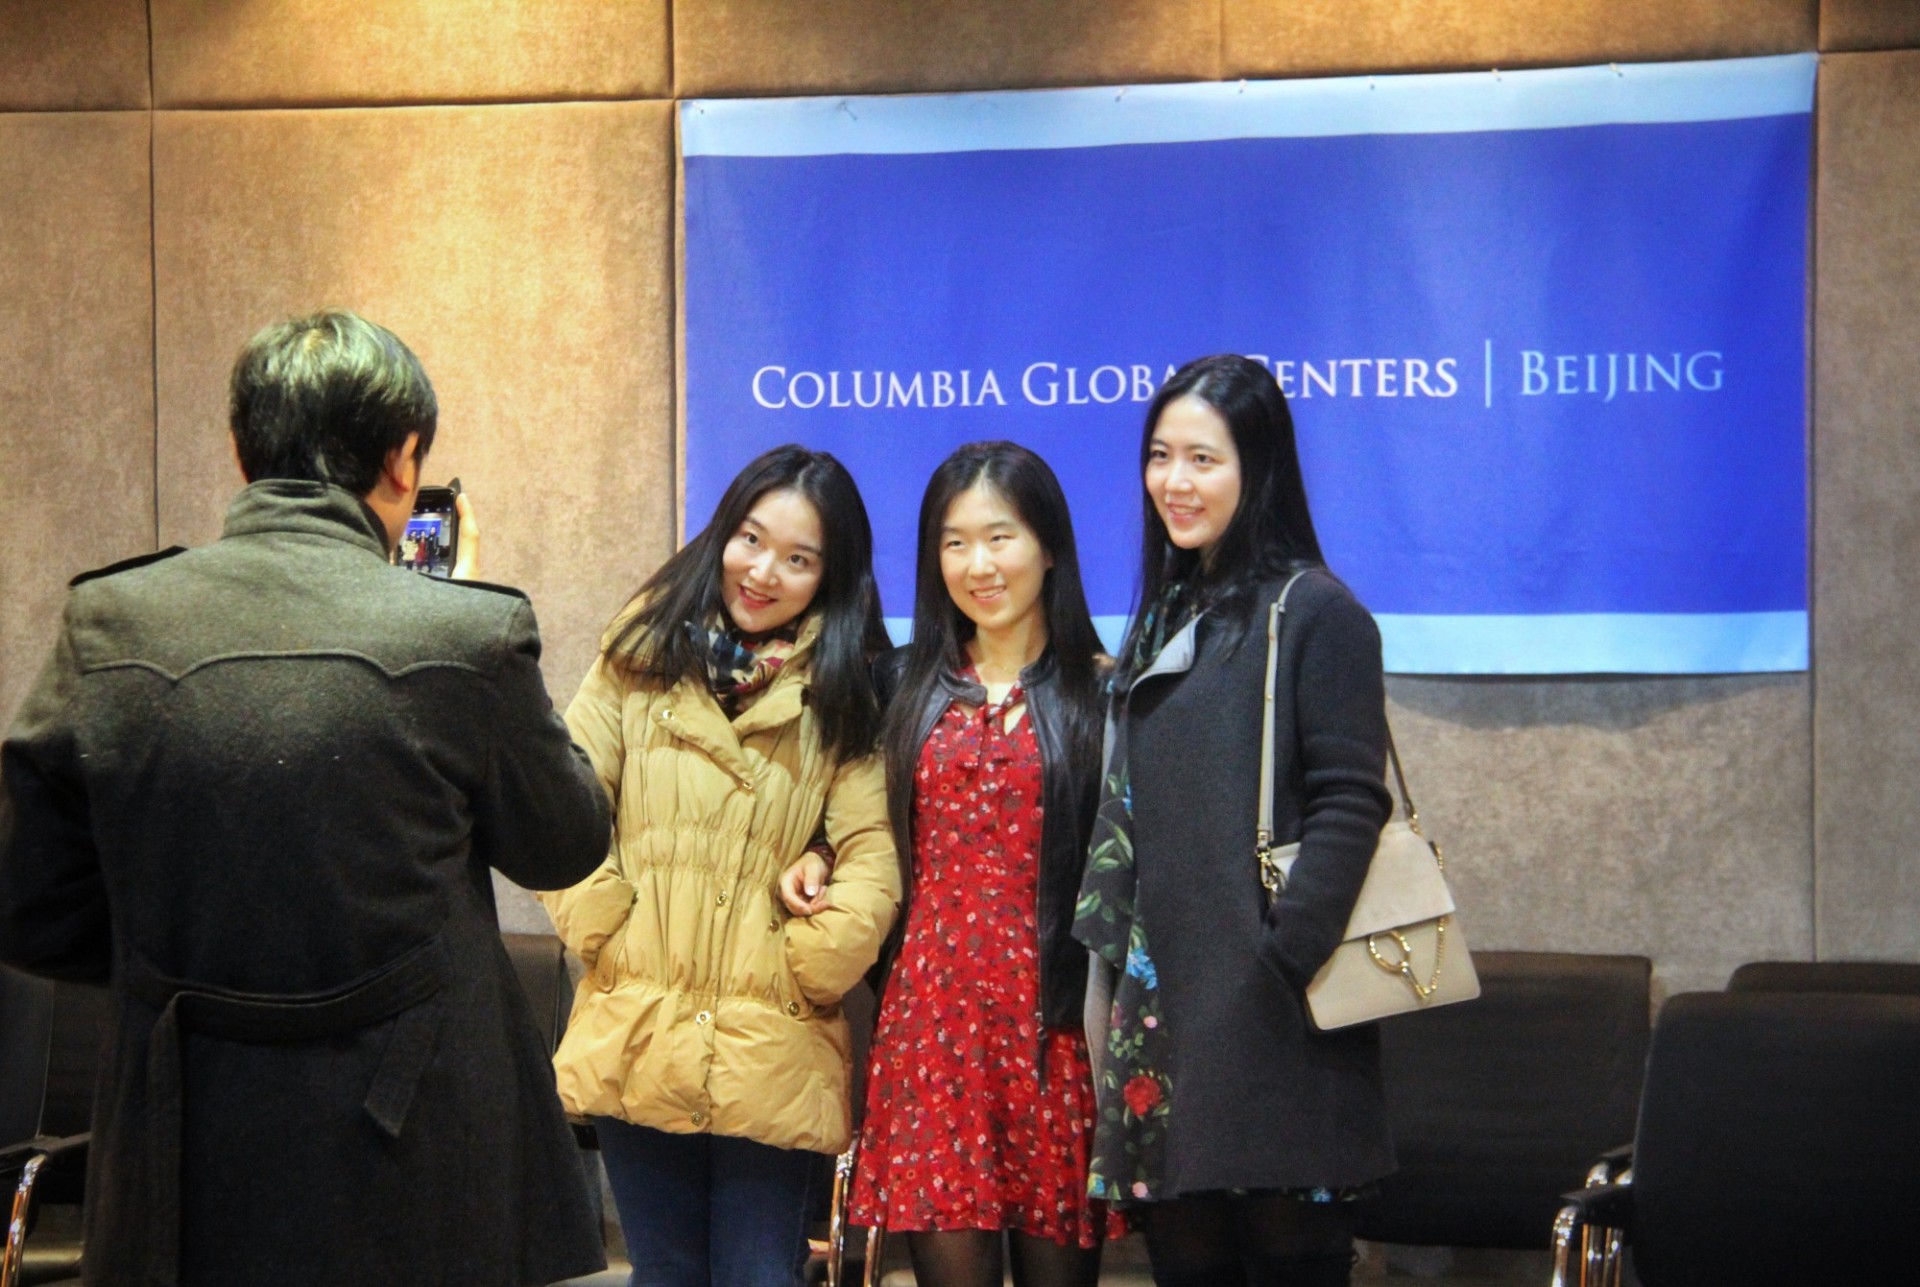 2017 Alumni Holiday Reception at Columbia Global Centers | Beijing